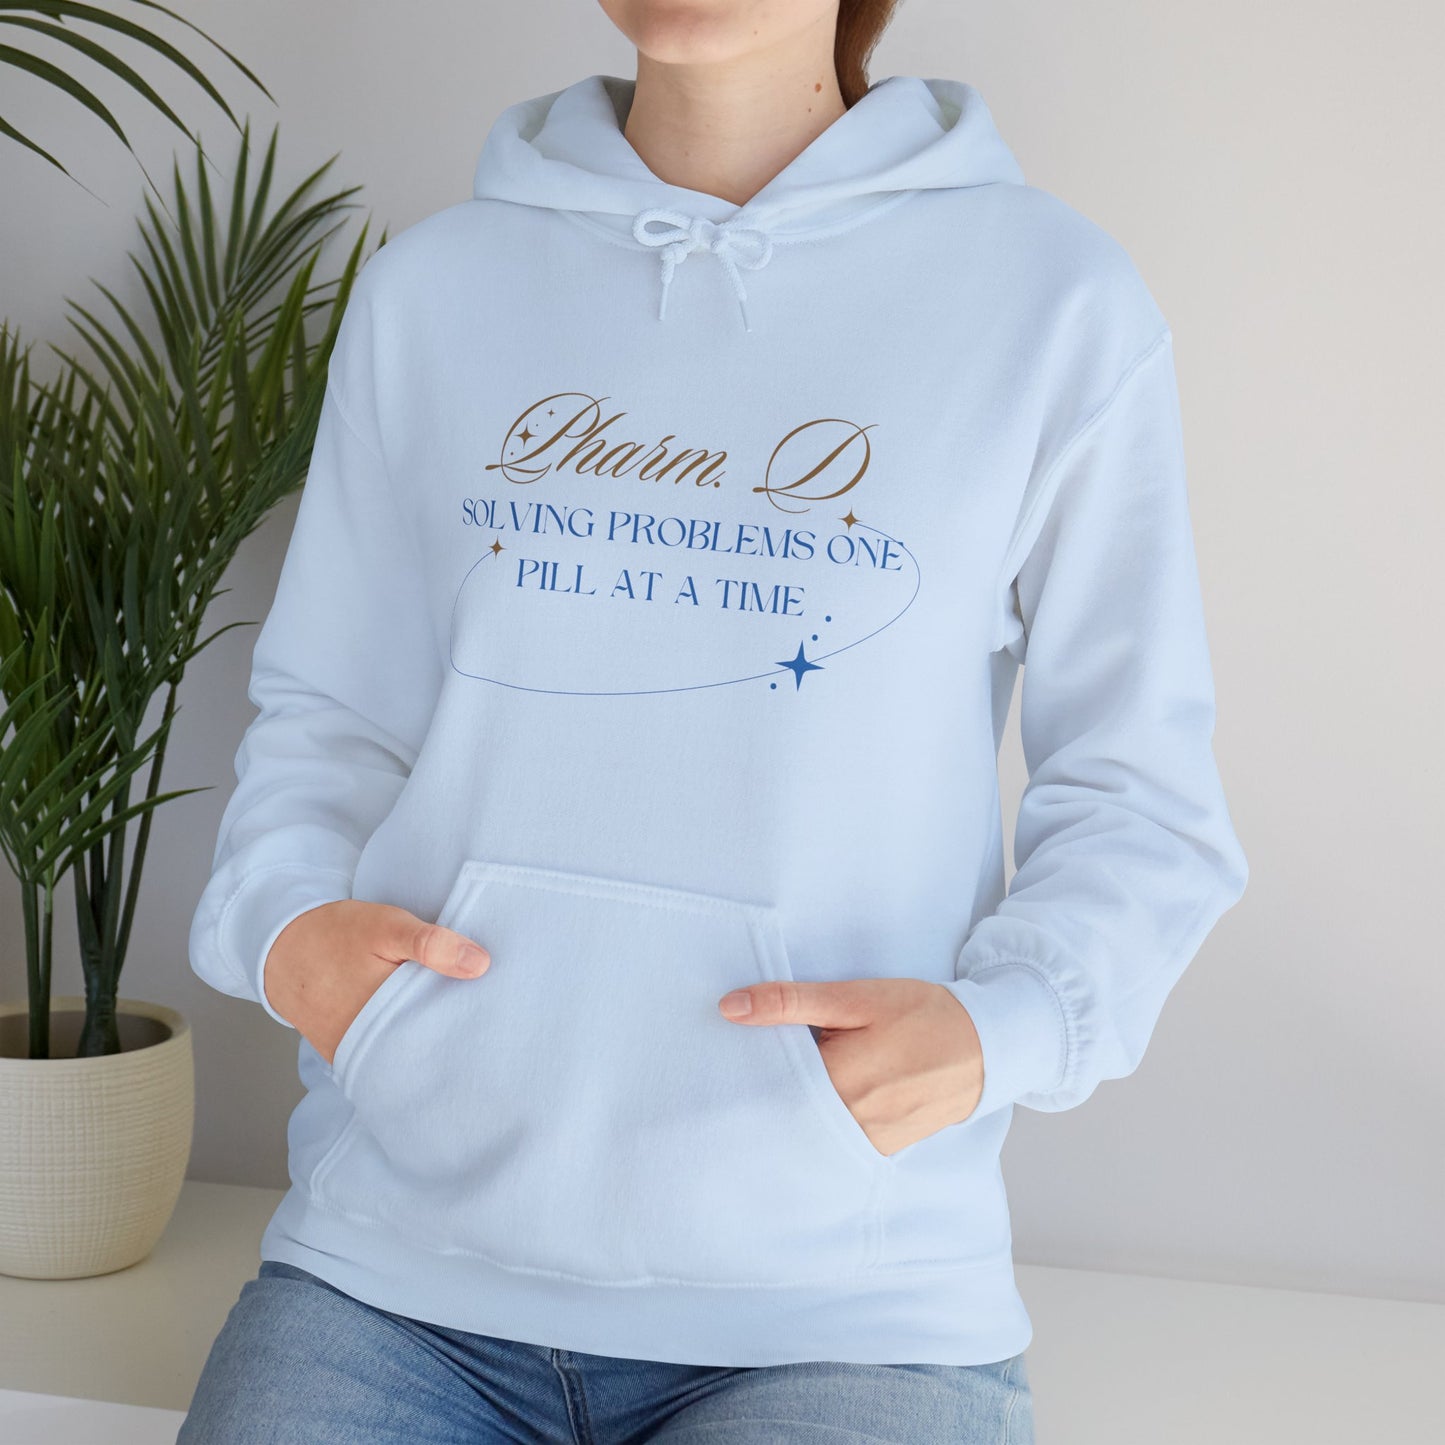 Pharm.D.- Hoodies with Doctor of Pharmacy Credentials